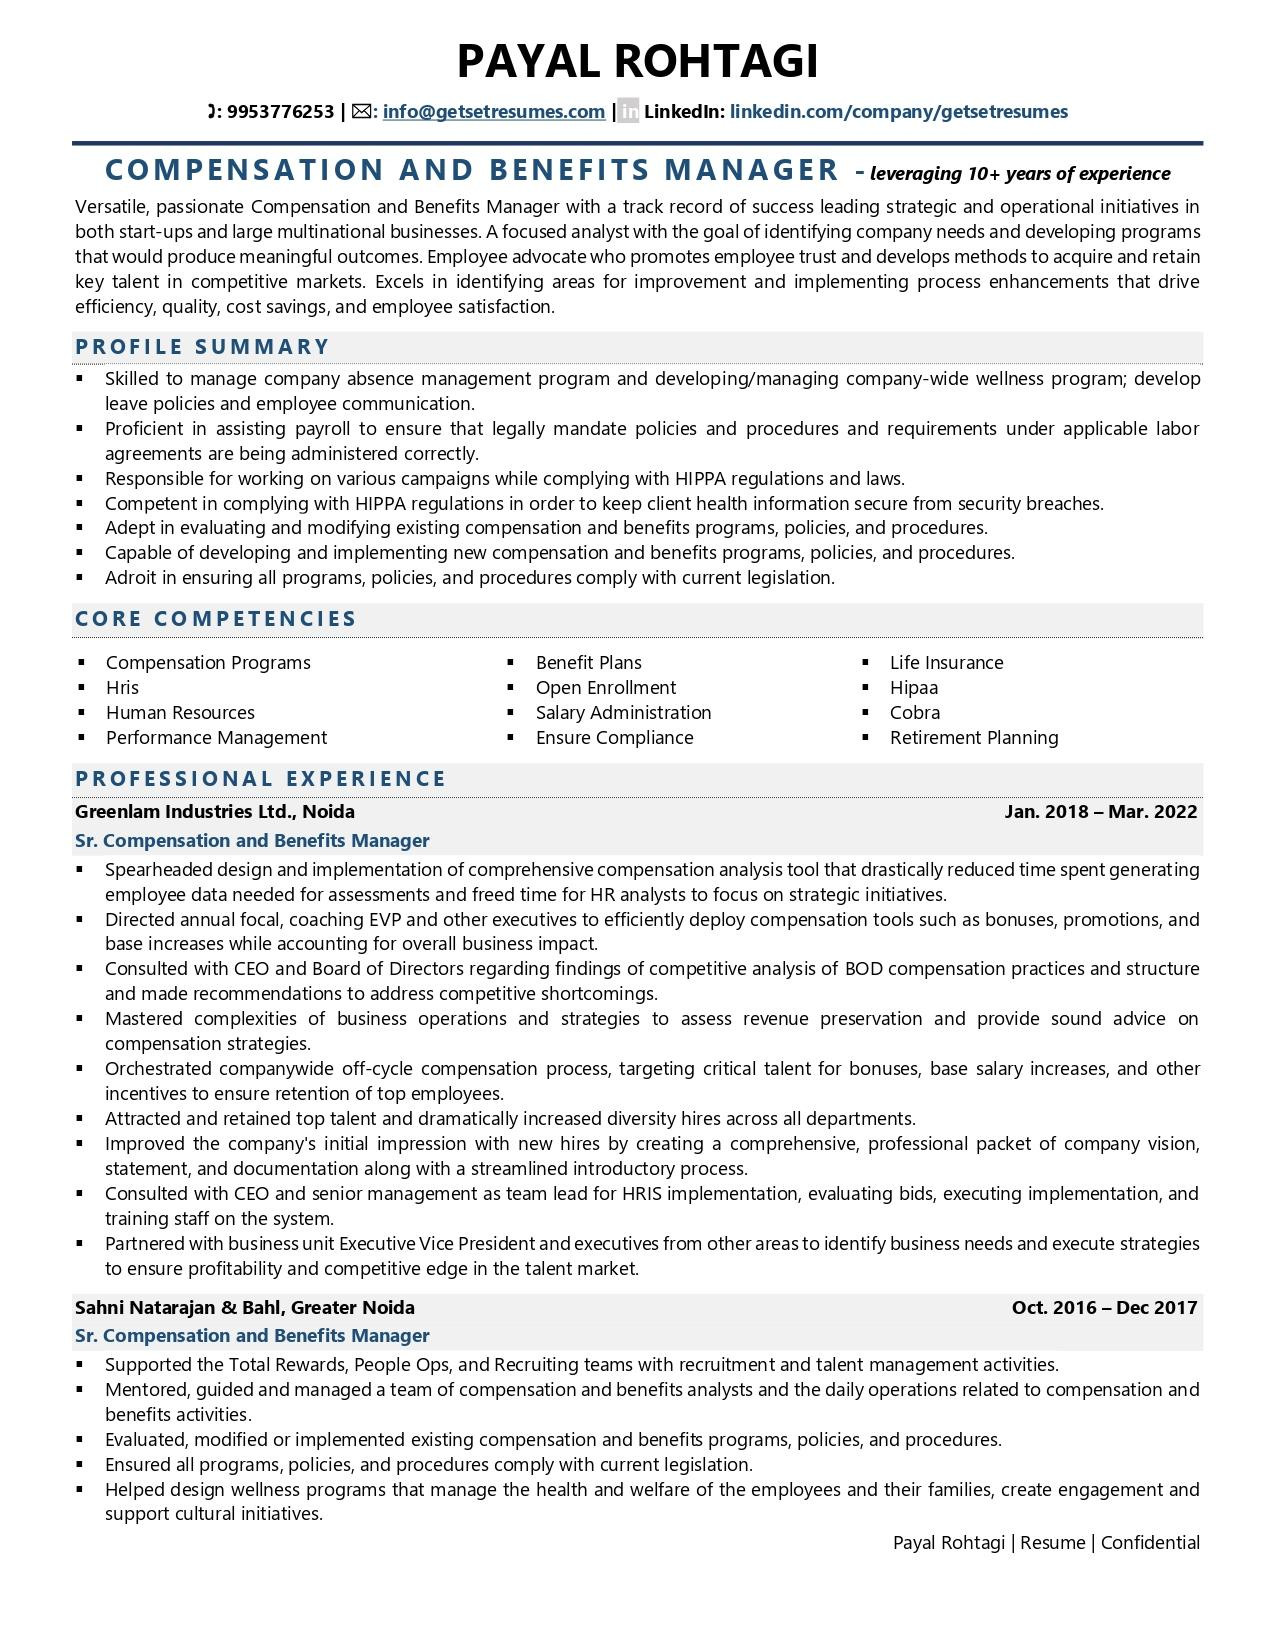 Employee Benefits Account Manager Resume Sample Compensation & Benefits Manager Resume Examples & Template (with …